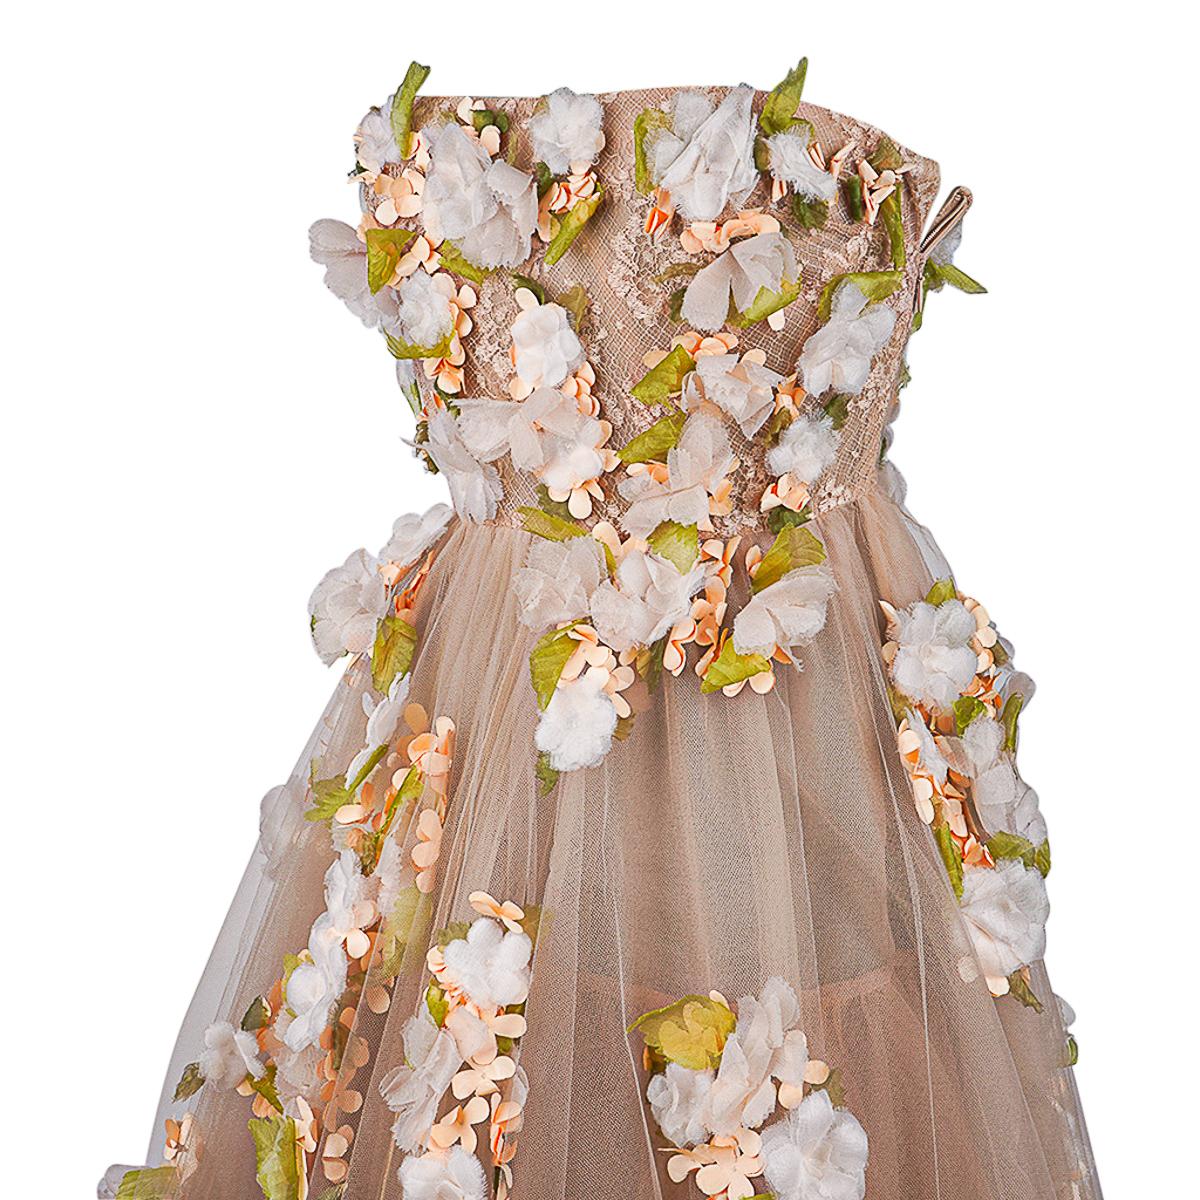 Valentino Strapless Empire Nude Flower Adorned Gown 1 of 2 Size 0 2